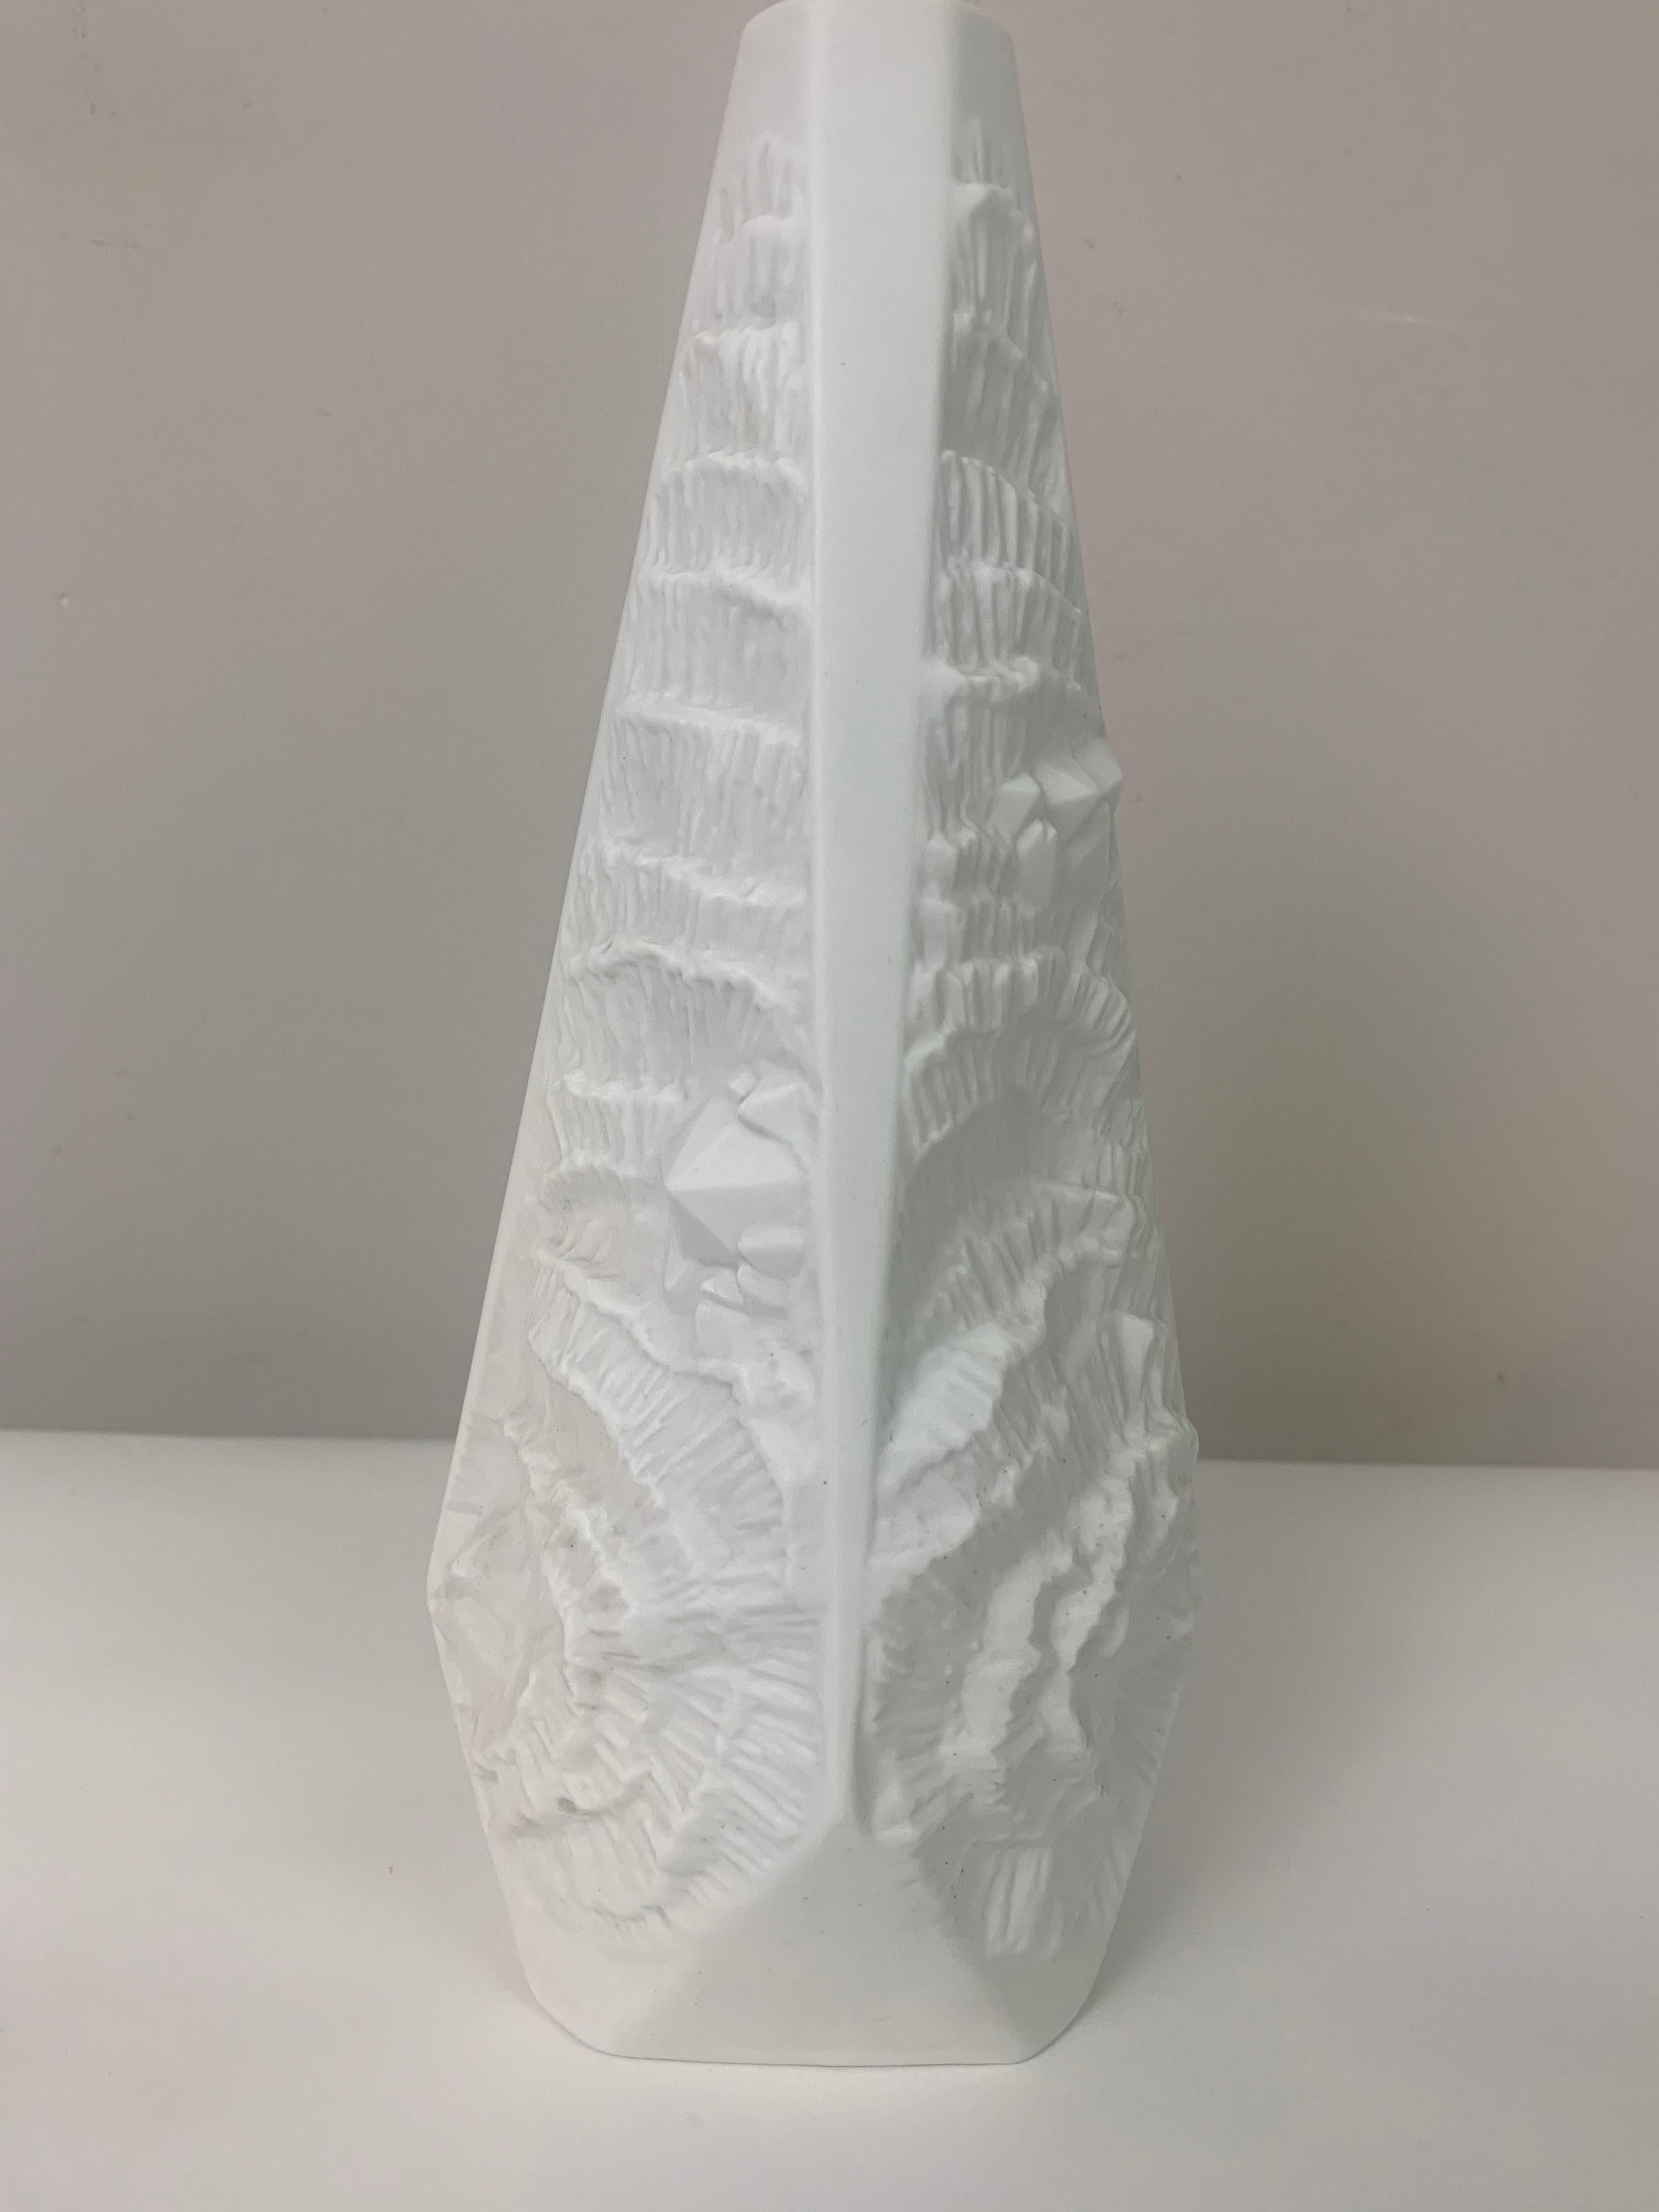 An unusual pyramid op art white bisque matte porcelain vase with an abstract relief fossil design on four sides. Manufactured by Alka Kunst Kaiser Porcelain in West Germany during the 1970s. Inscribed on the base with the design number 274 with the